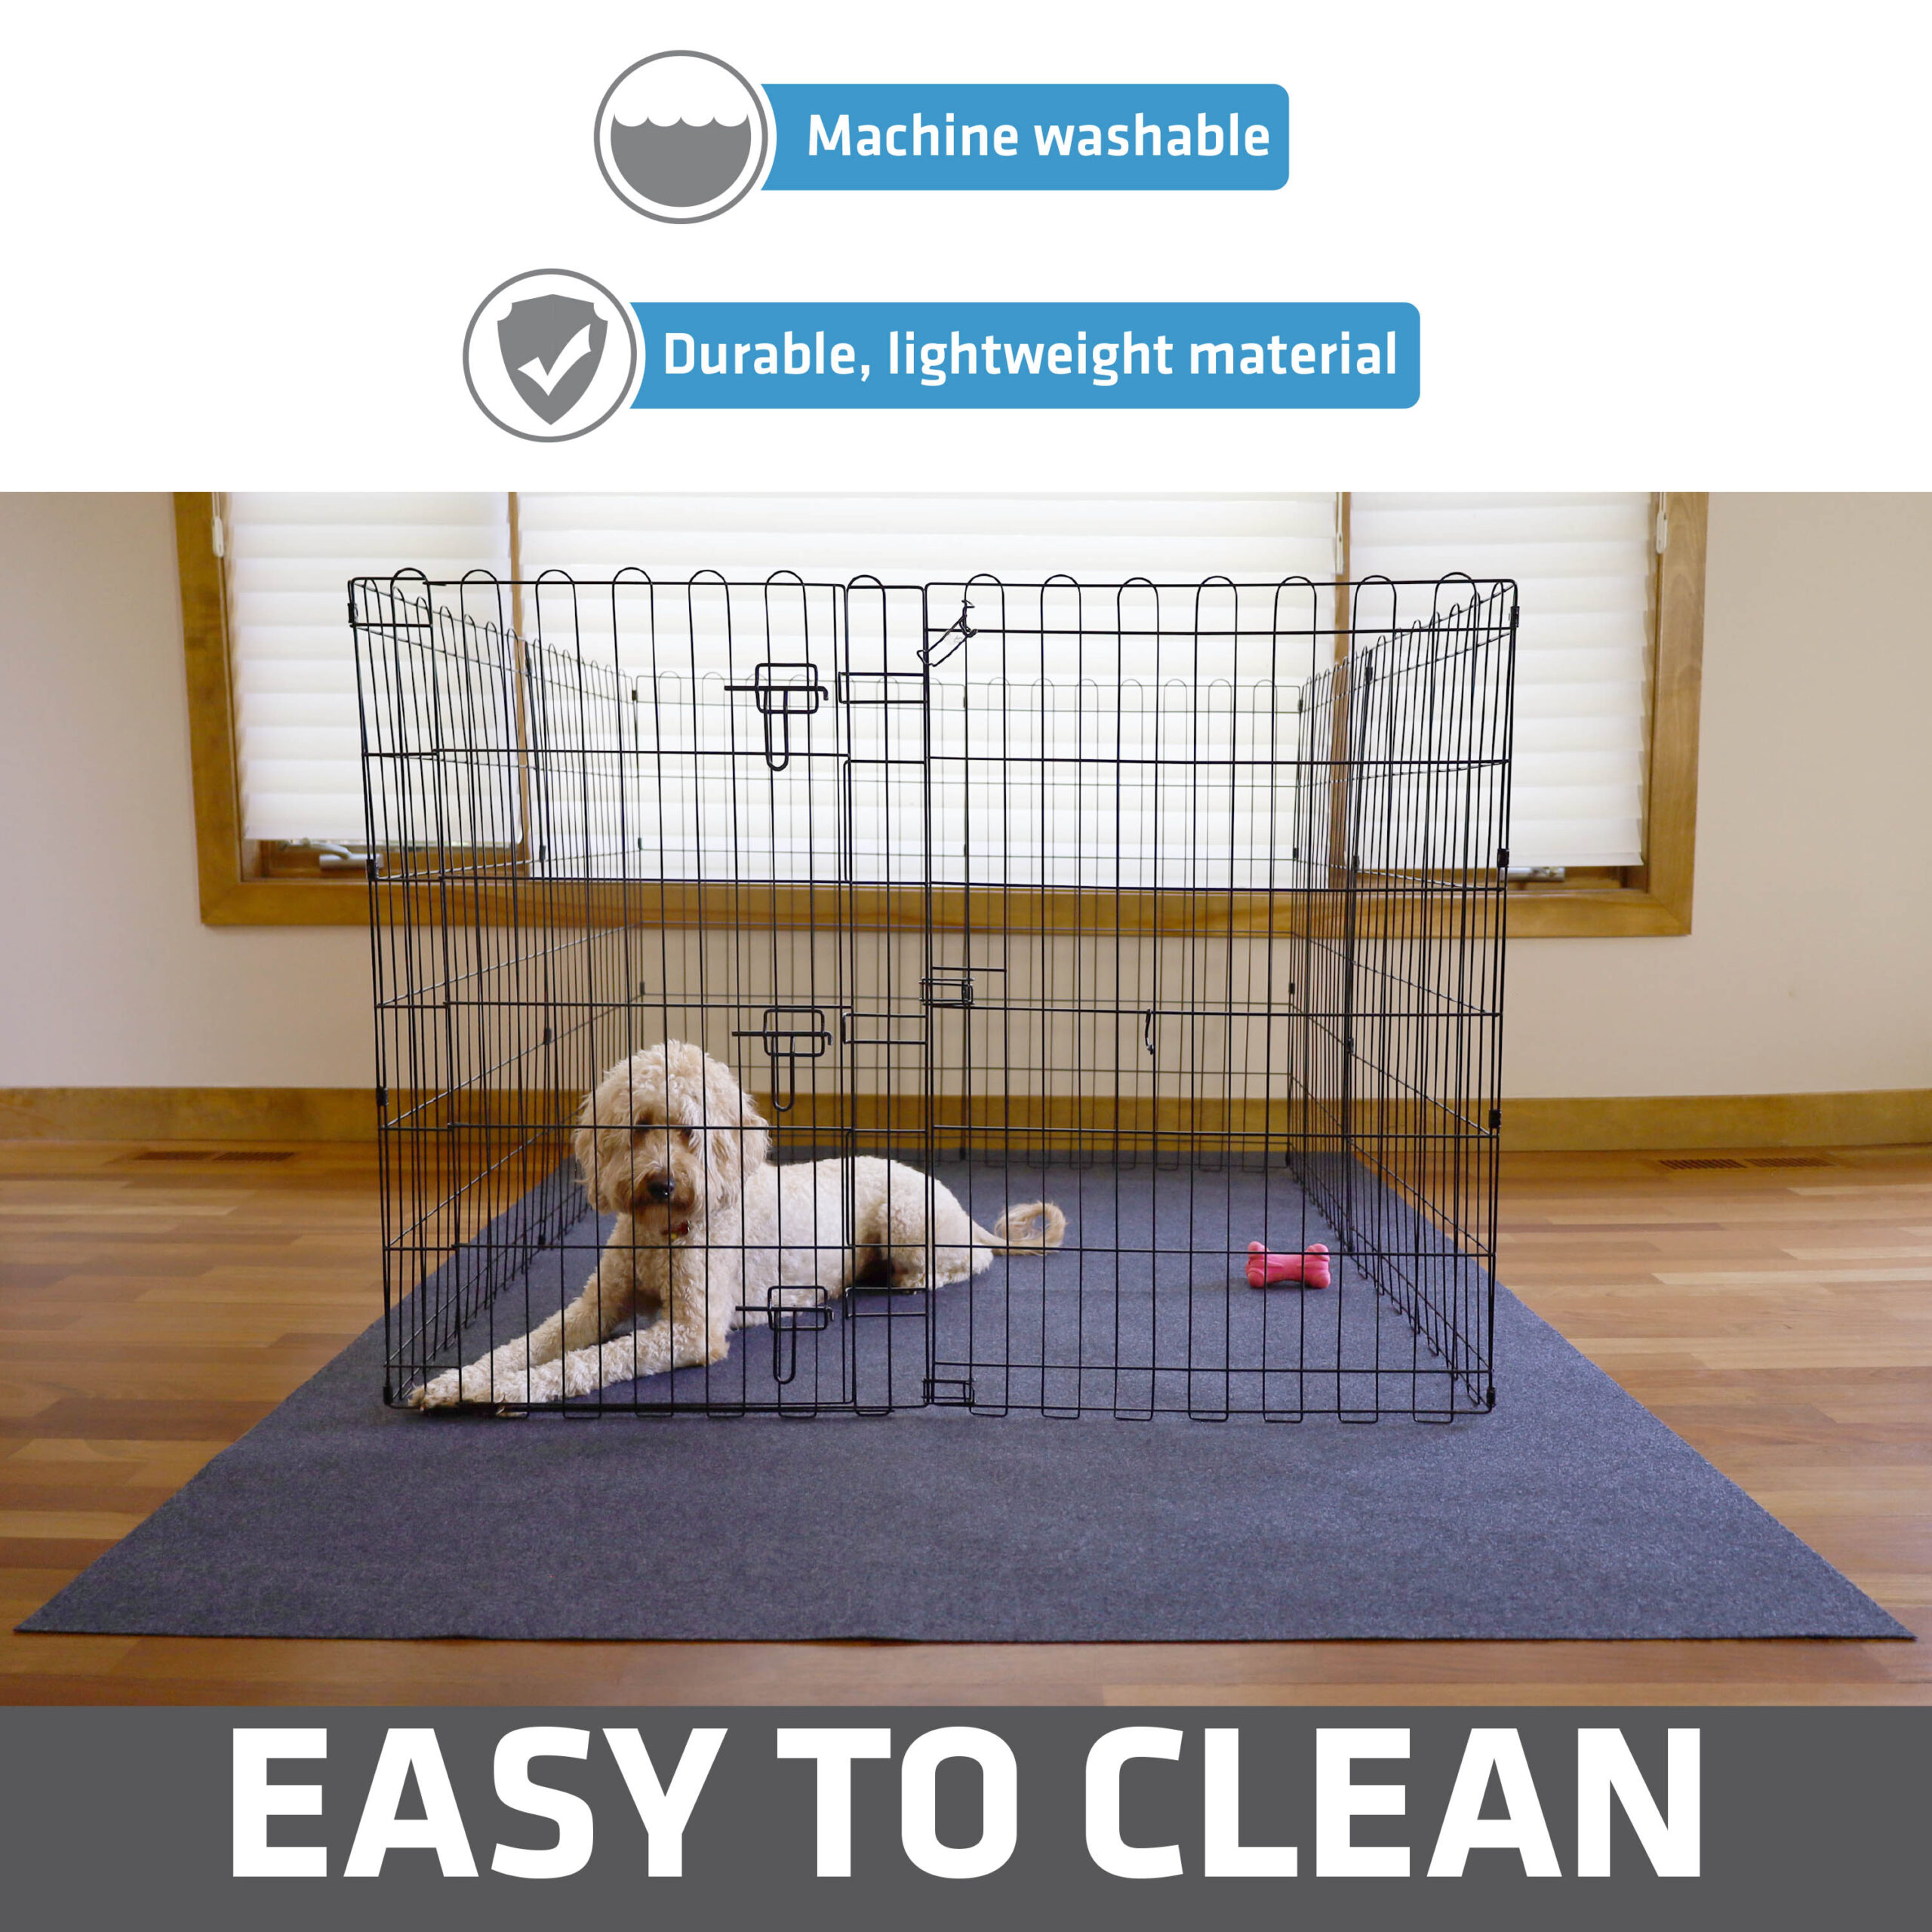 https://drymate.com/wp-content/uploads/2021/07/5-Easy-to-Clean_Dog-Playpen_VS3-scaled.jpg